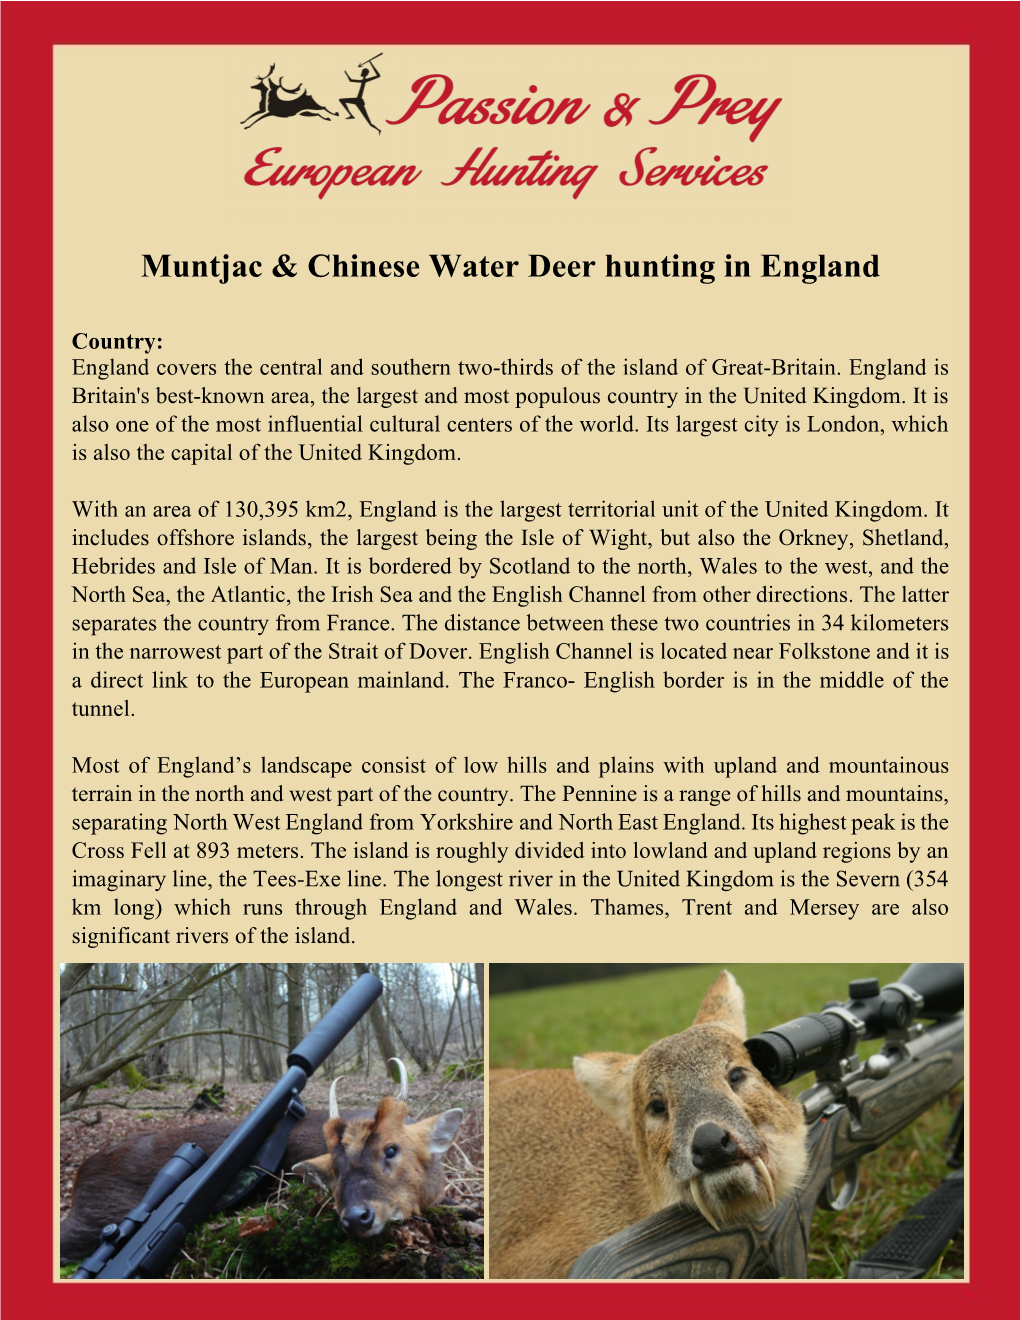 Muntjac & Chinese Water Deer Hunting in England